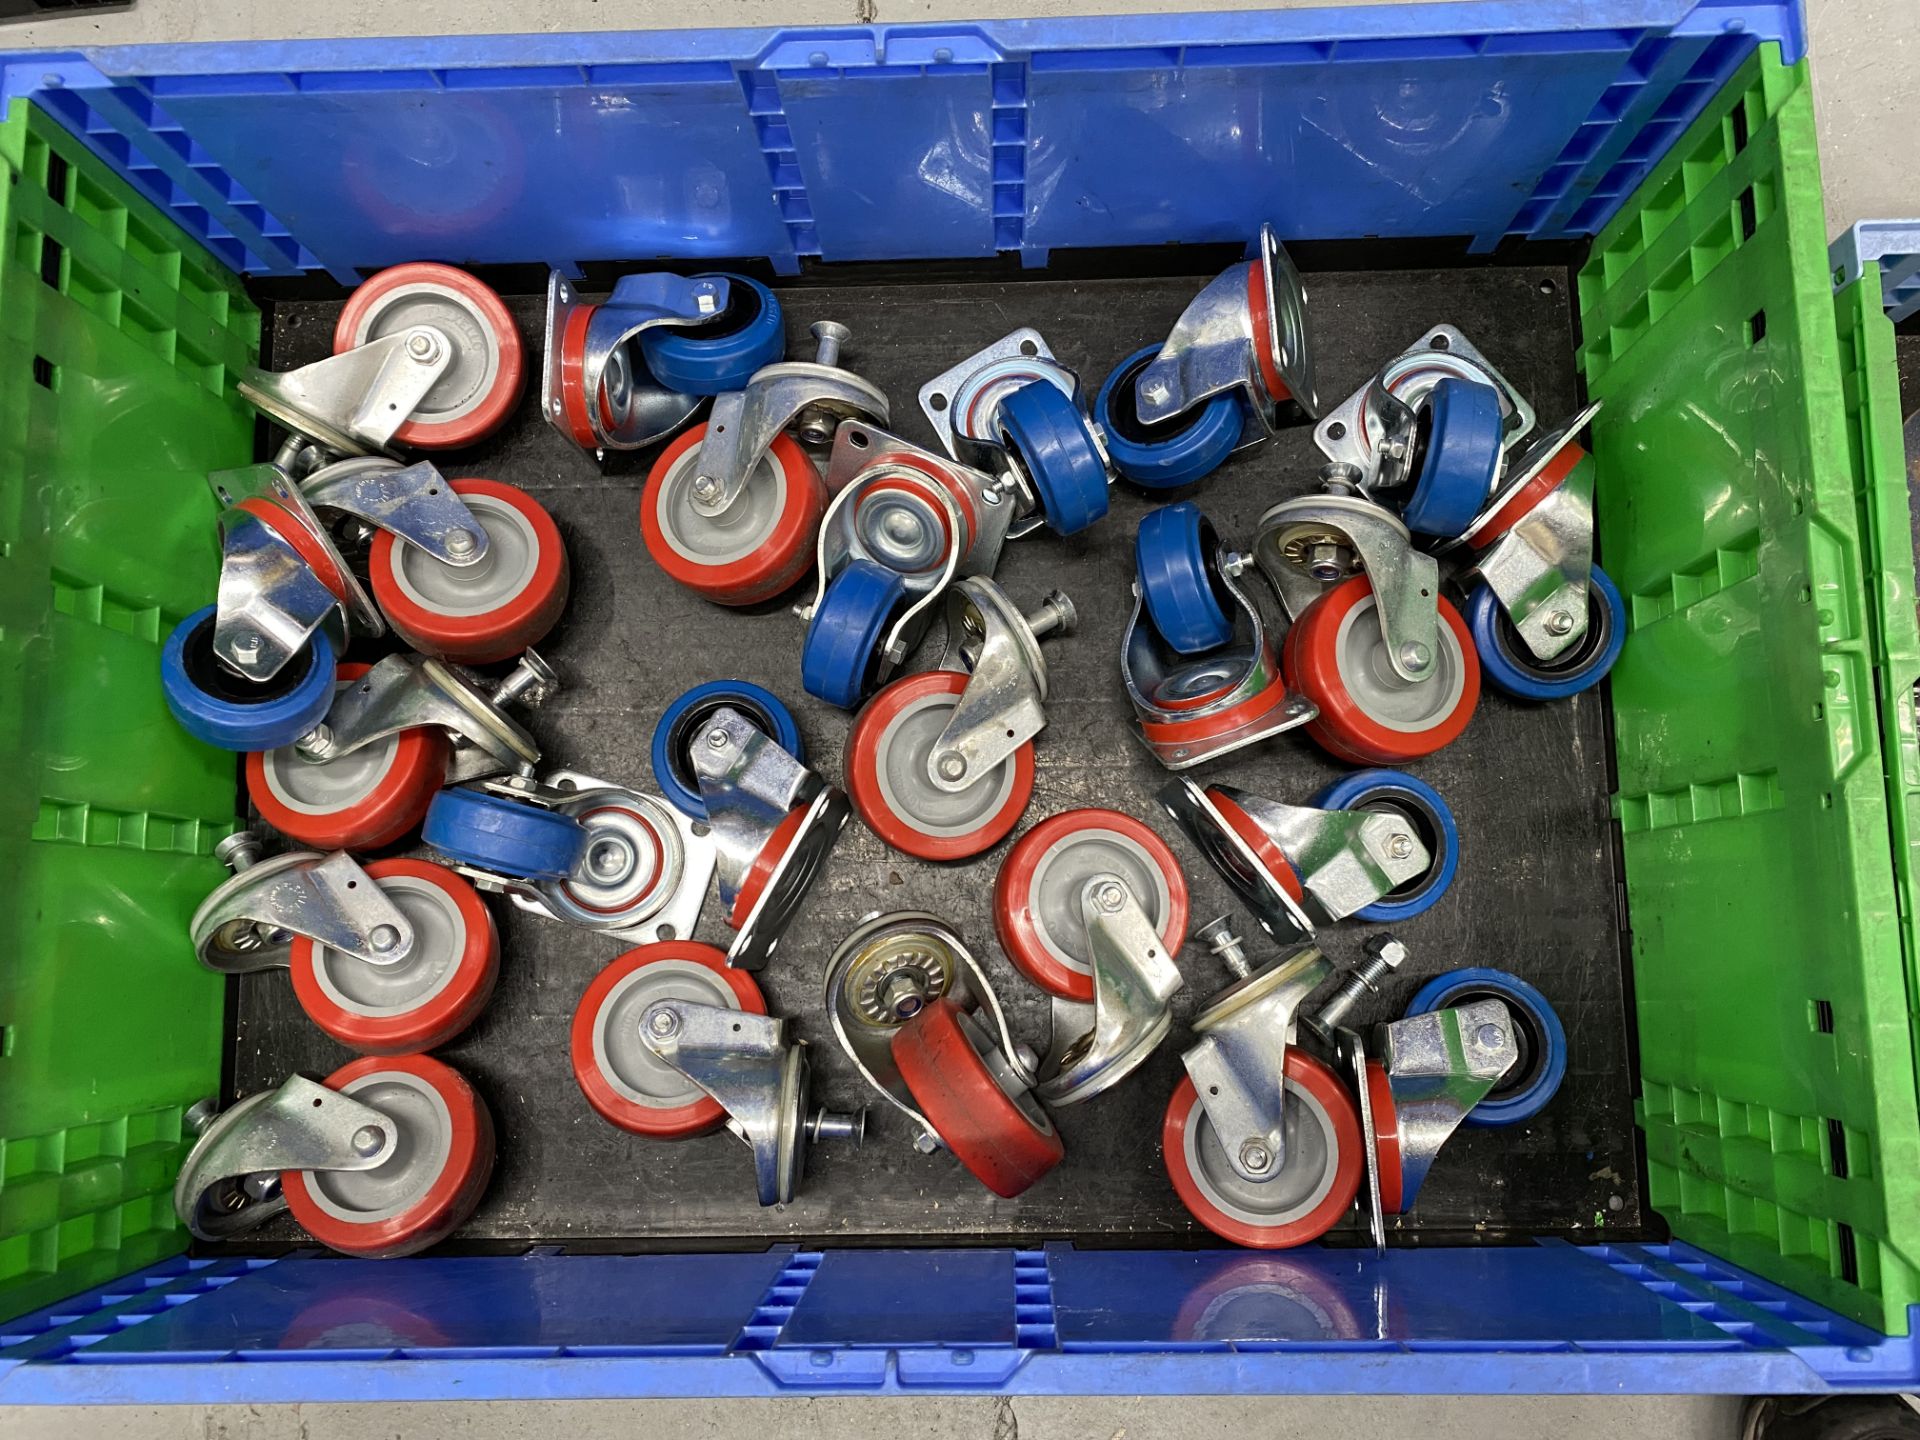 20 x caster wheels mixed used and unused